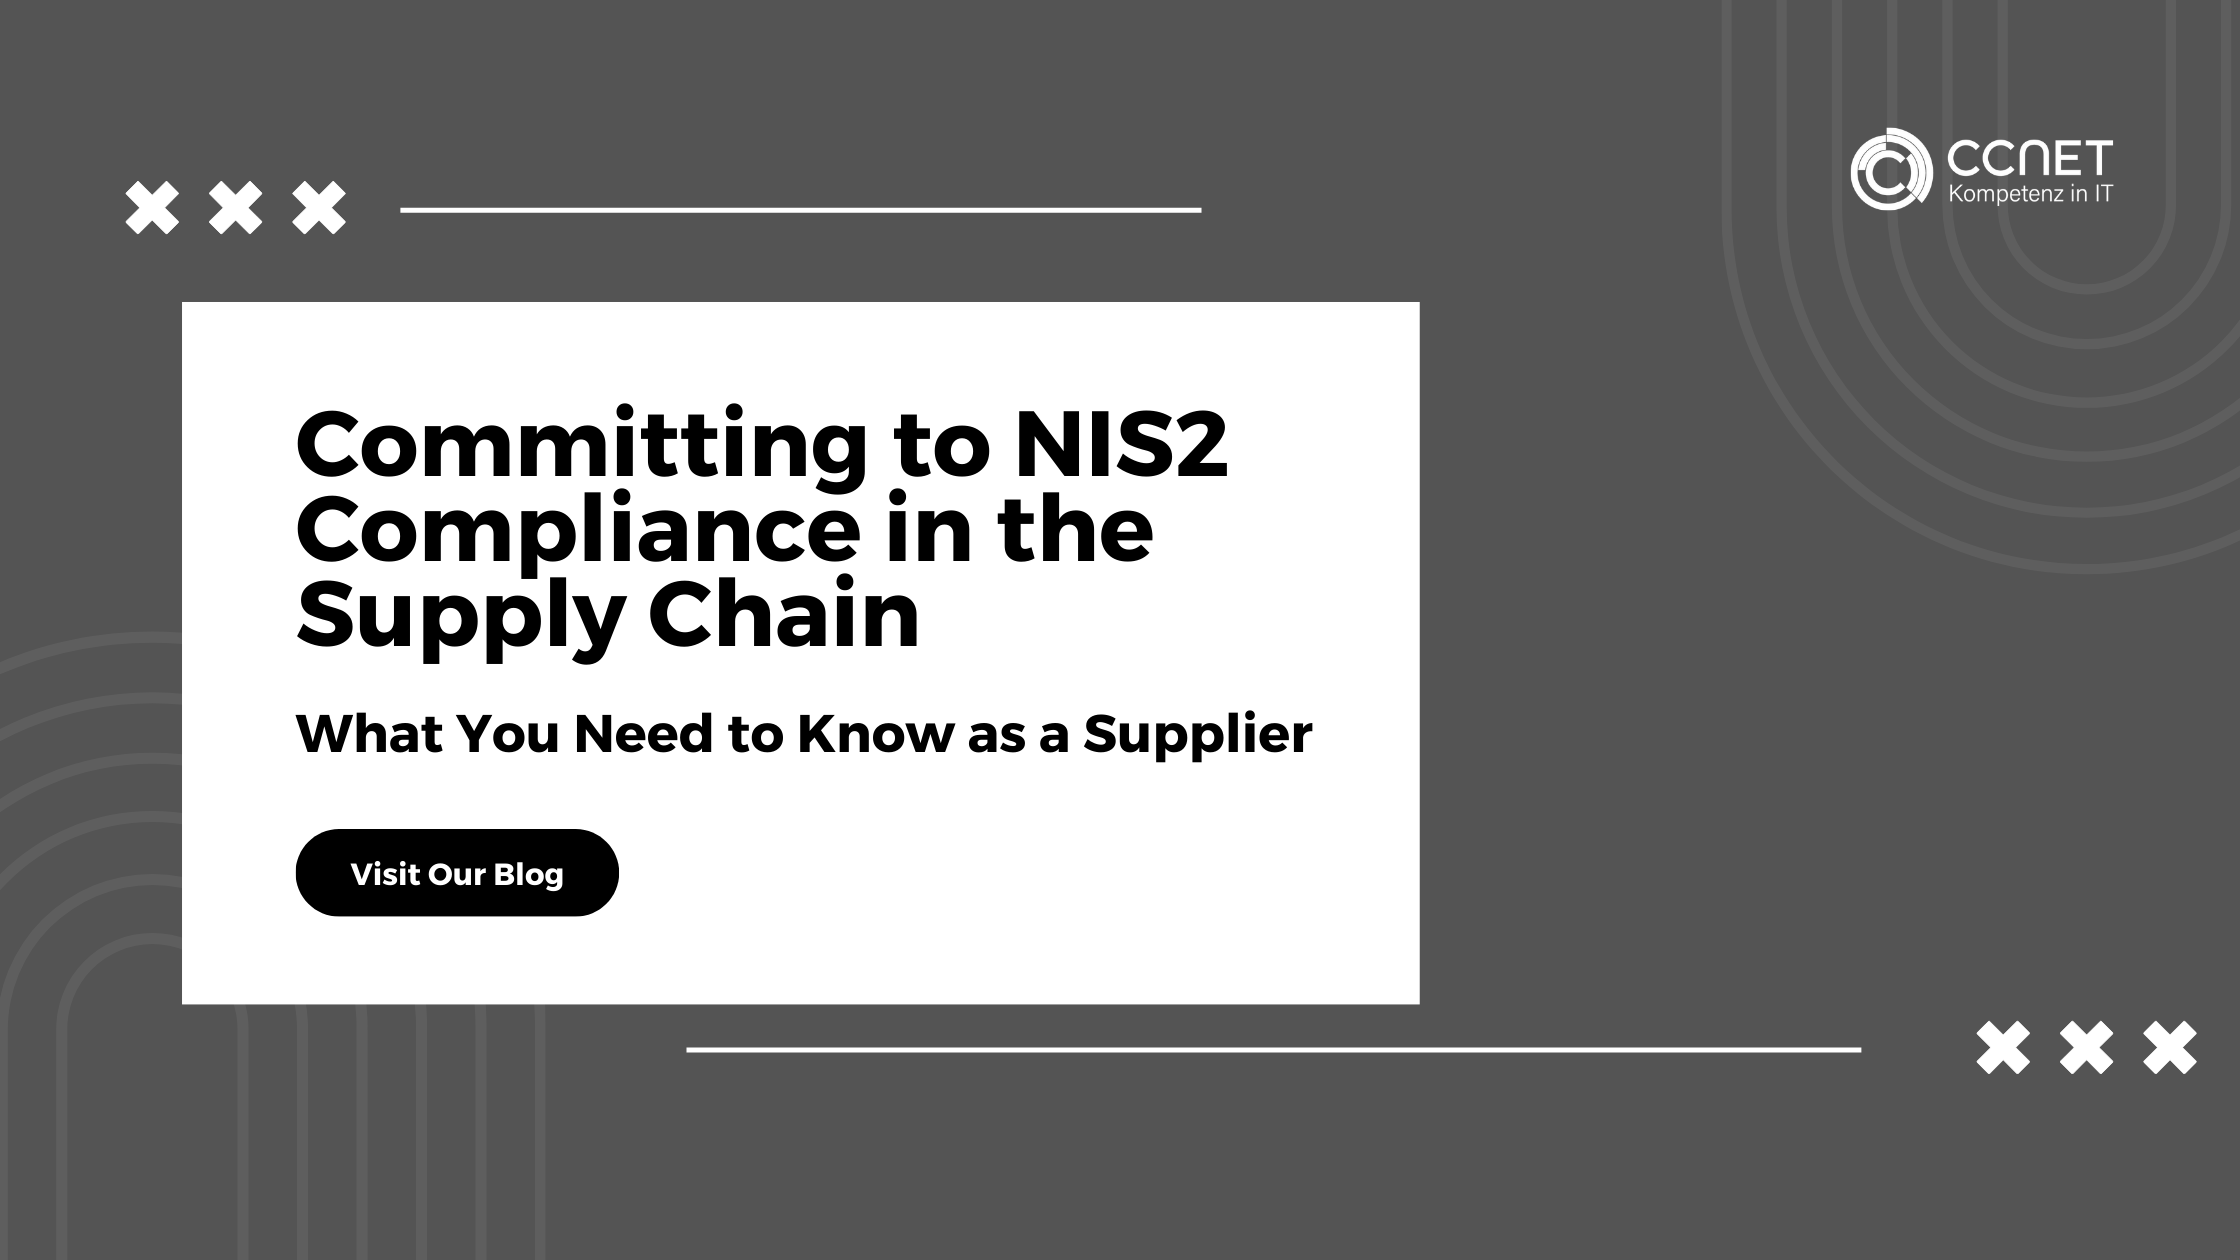 Committing to NIS2 Compliance in the Supply Chain: What You Need to Know as a Supplier